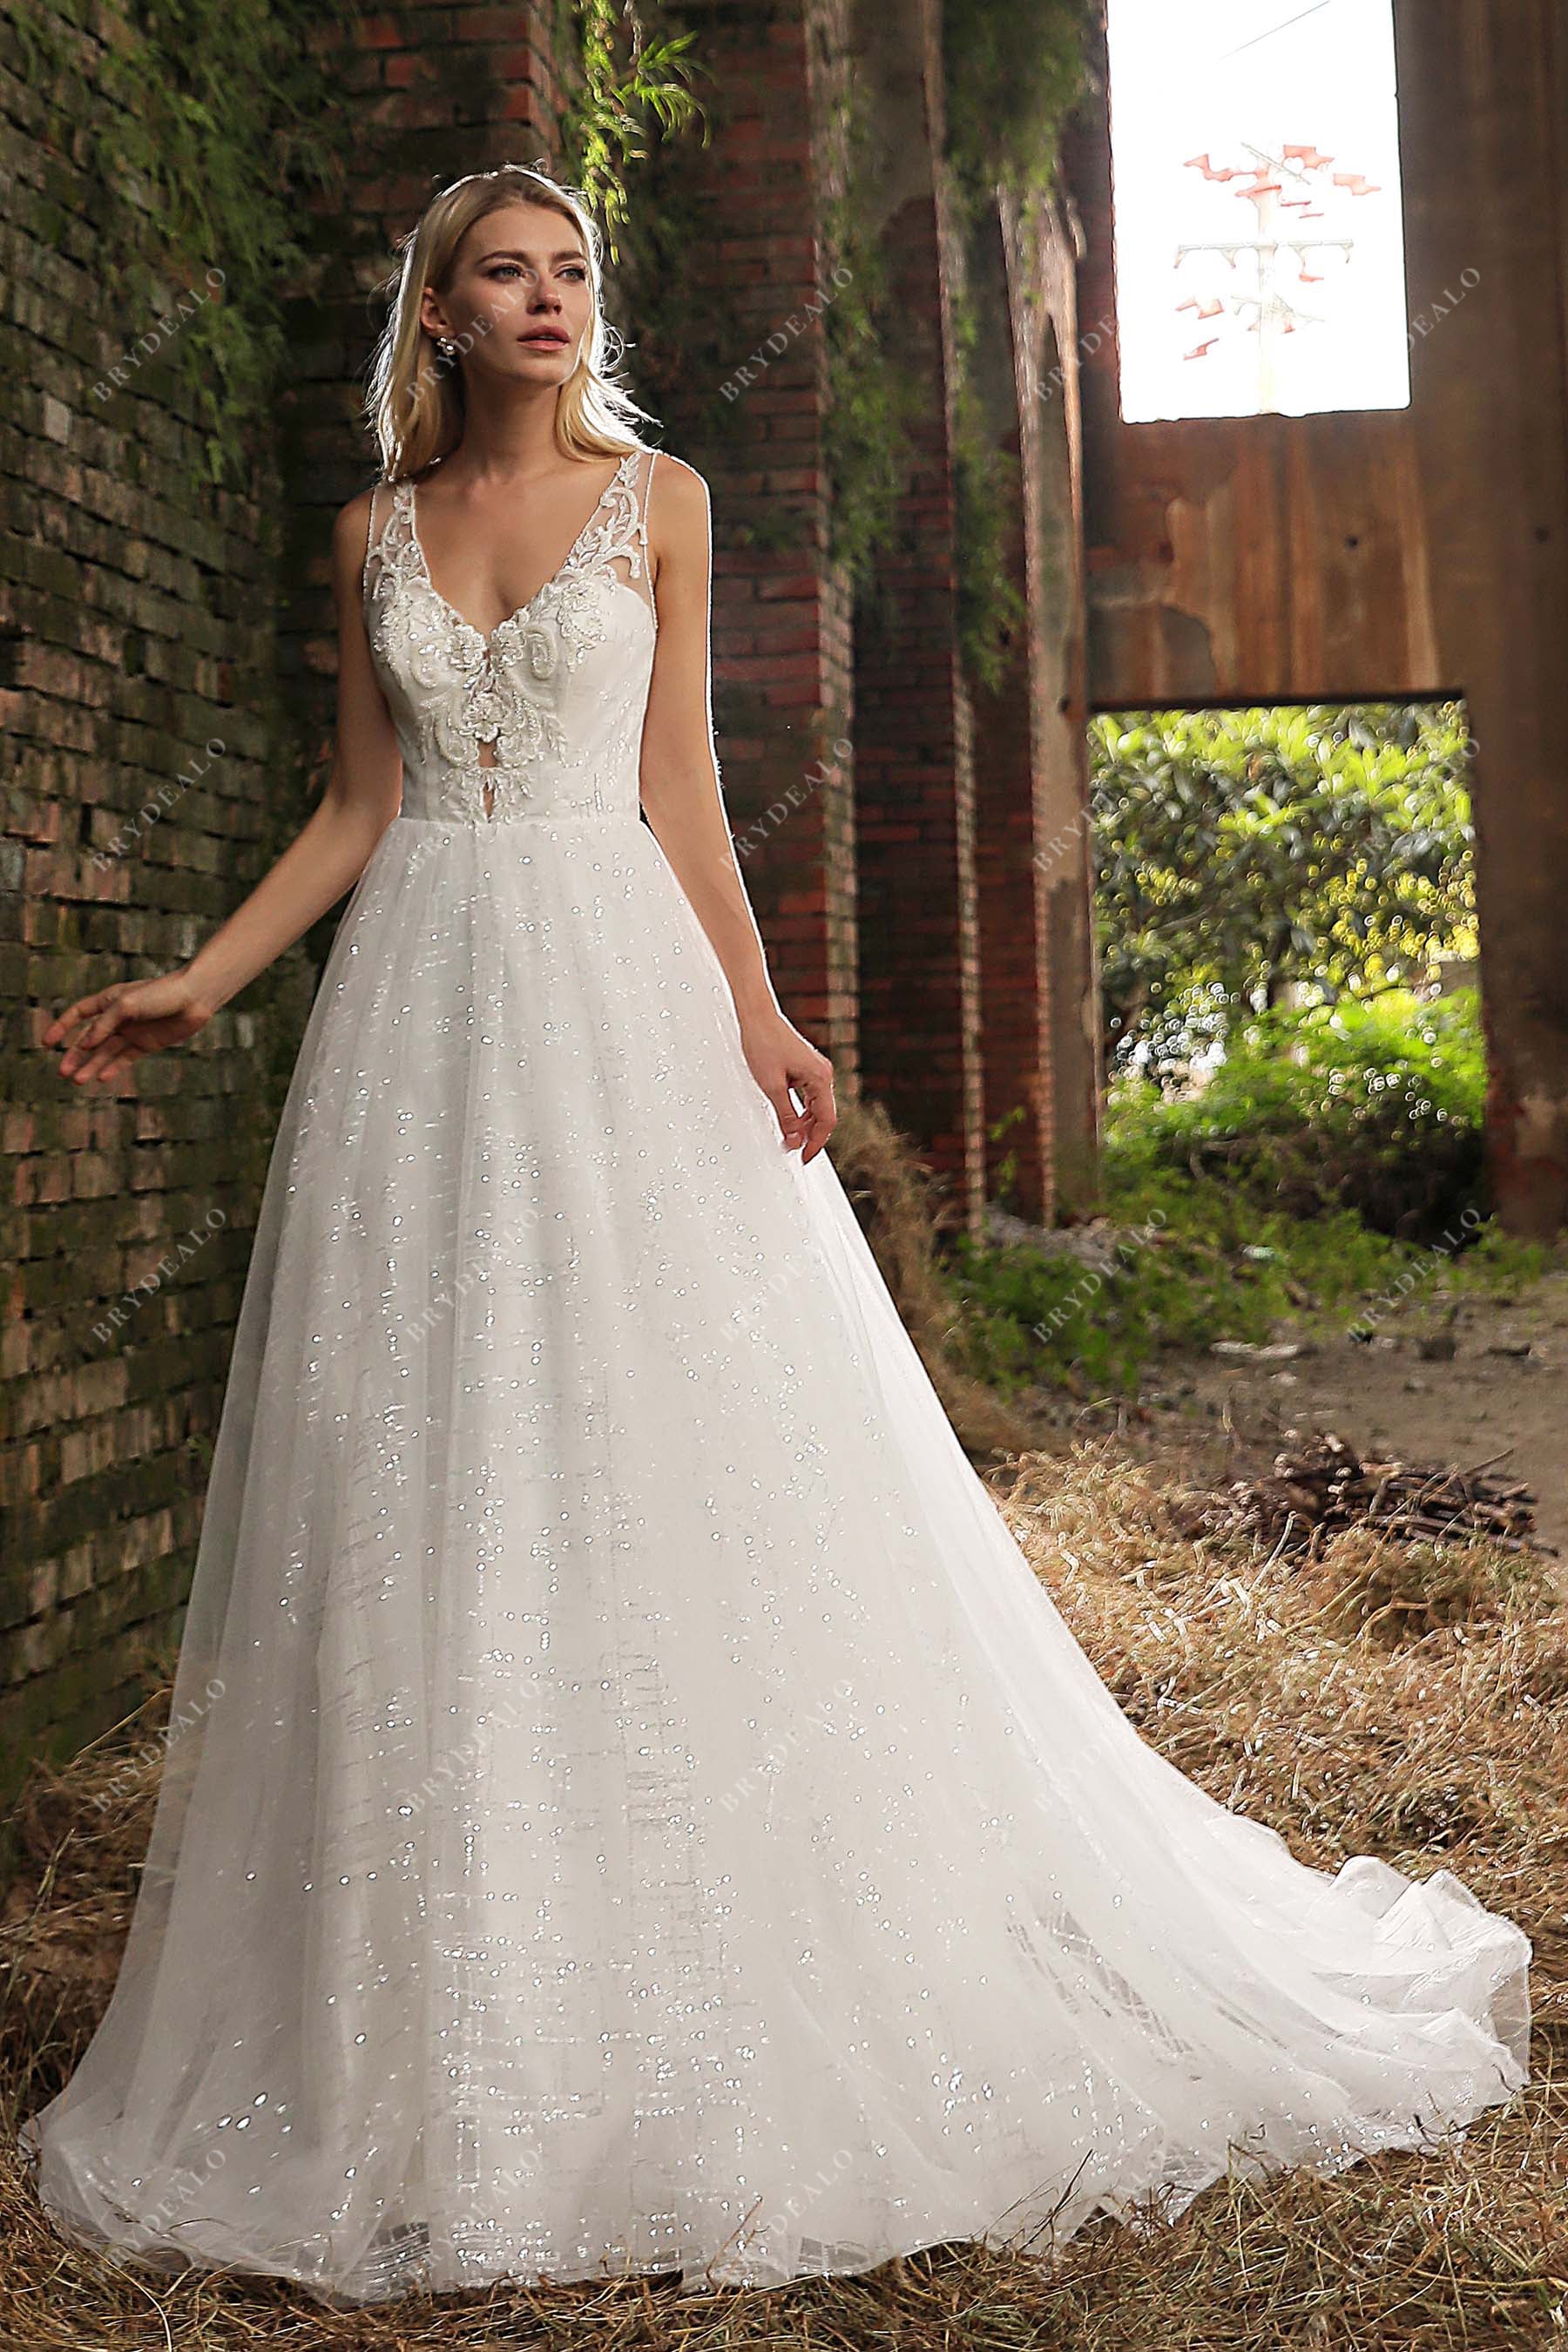 Plunging Neck Beaded Lace Destination Sequined Bridal Dress